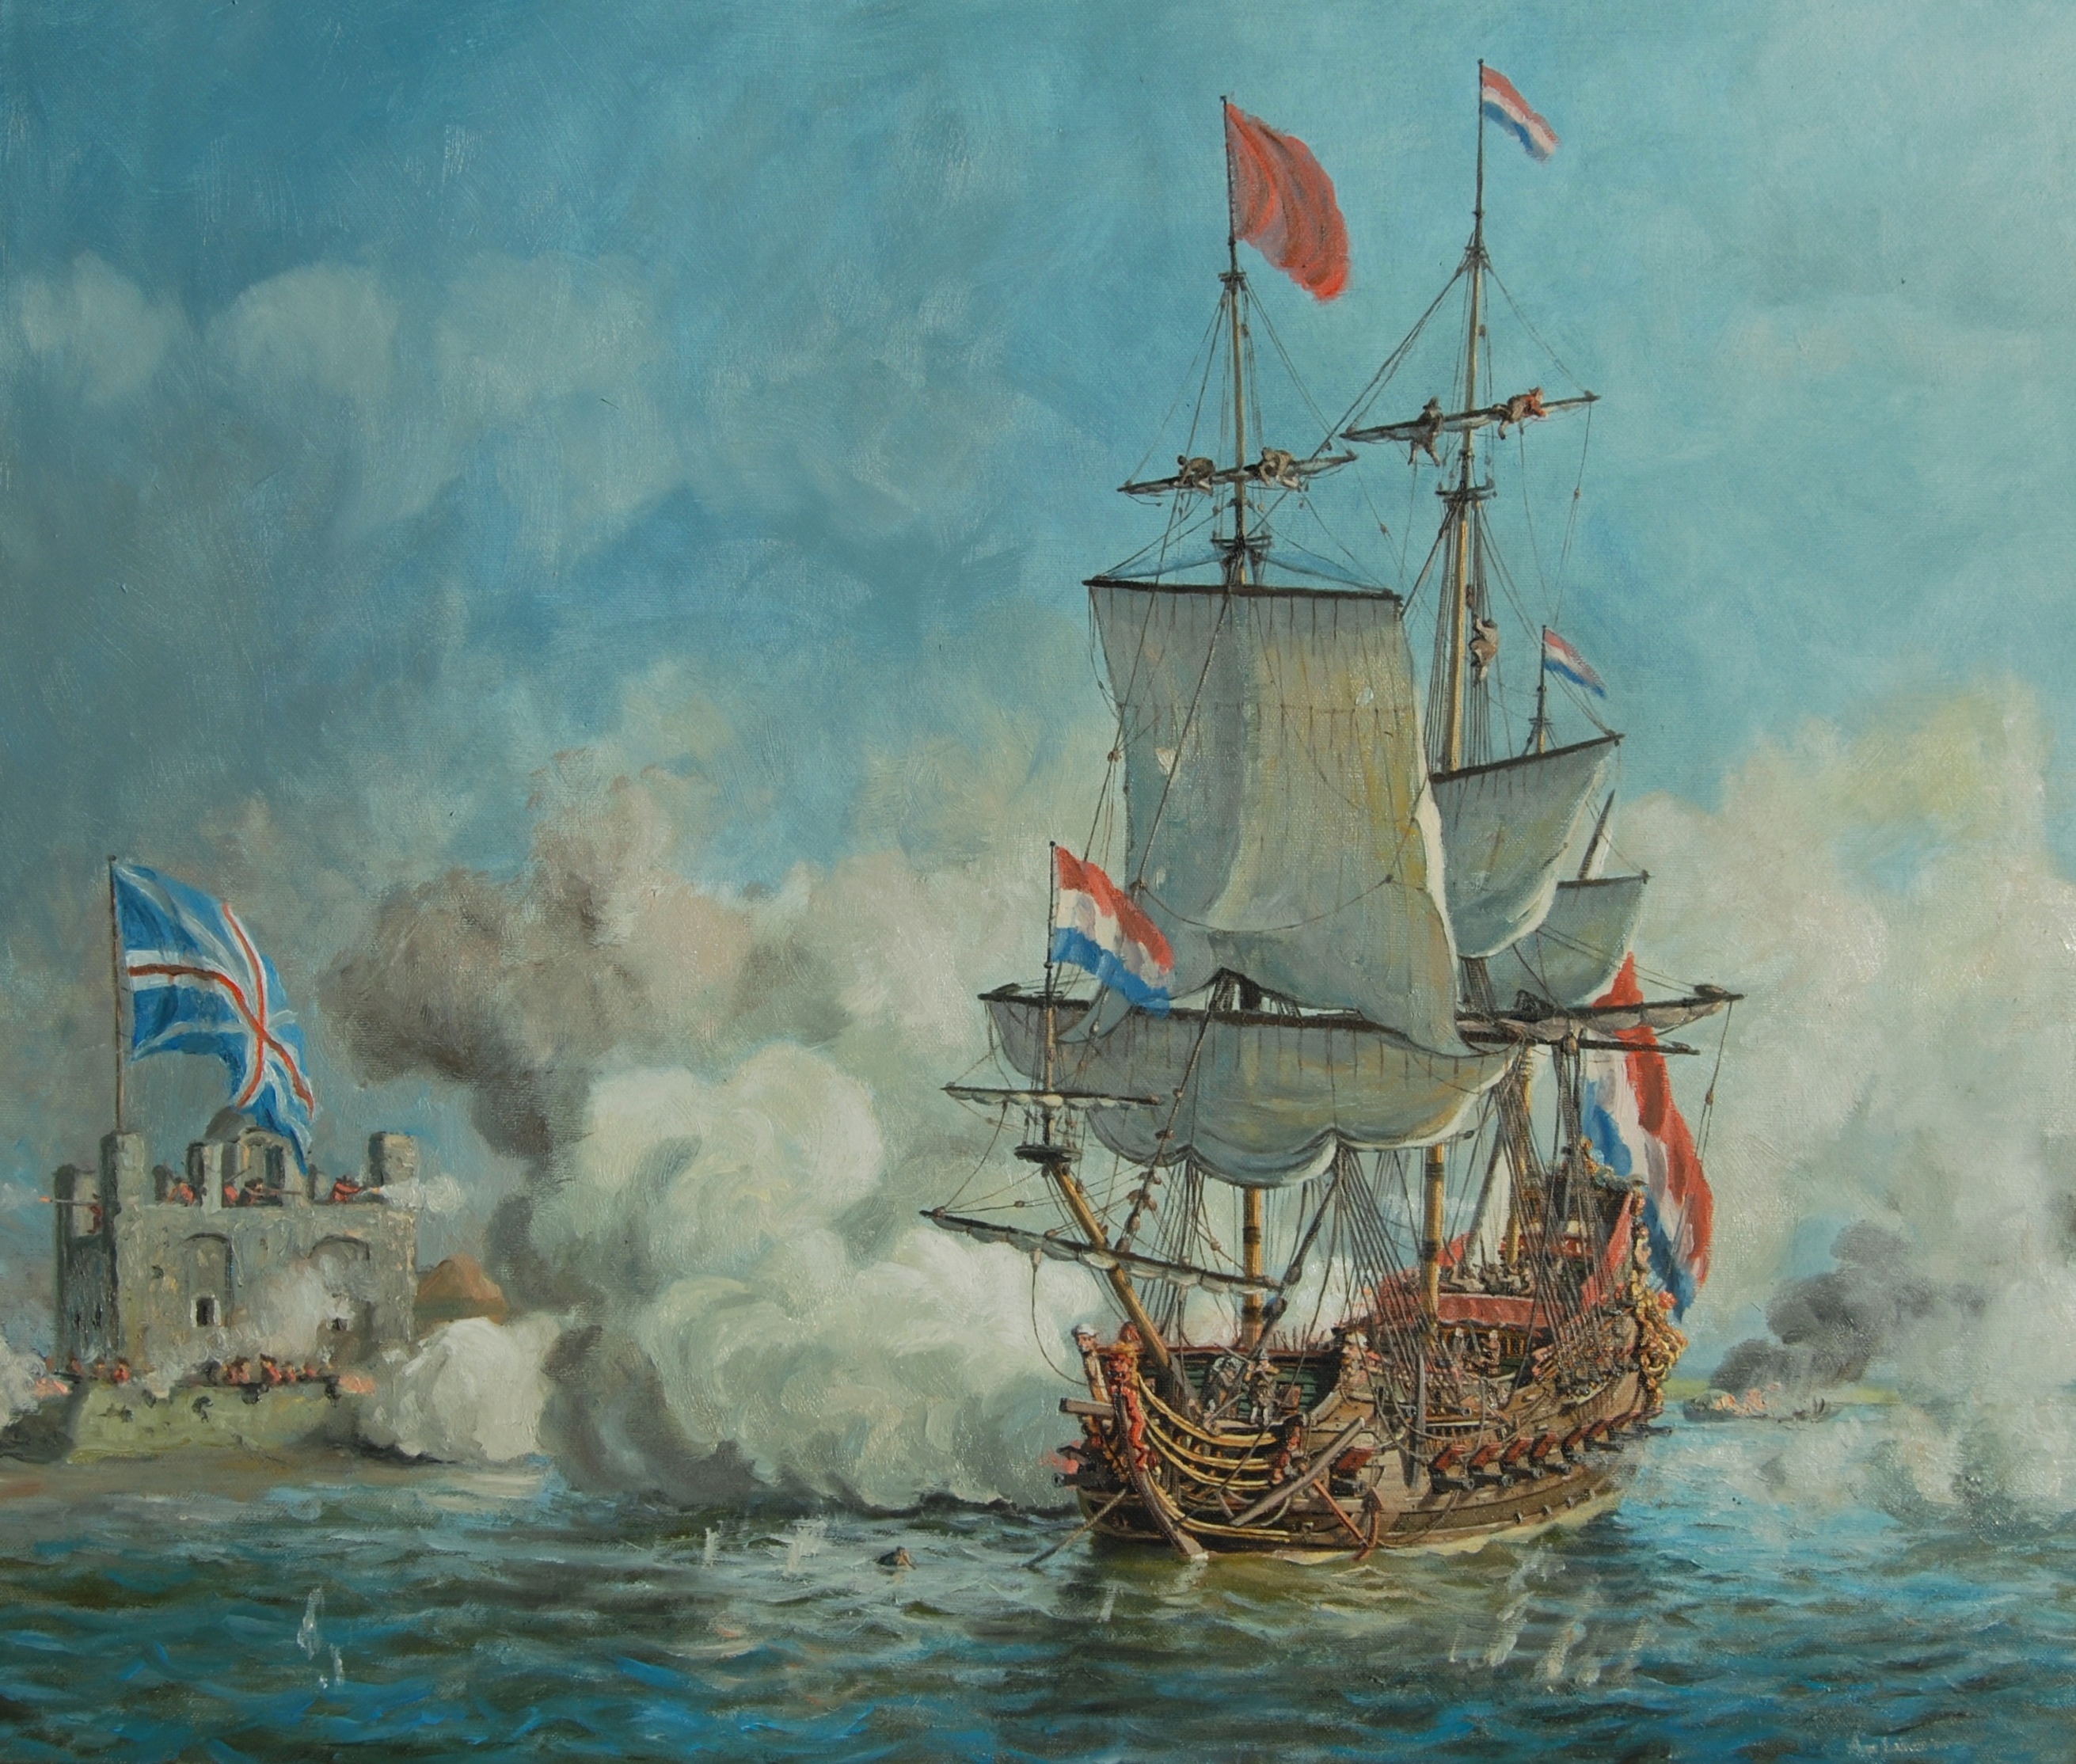 Dutch attacking the English during the Anglo-Dutch Wars